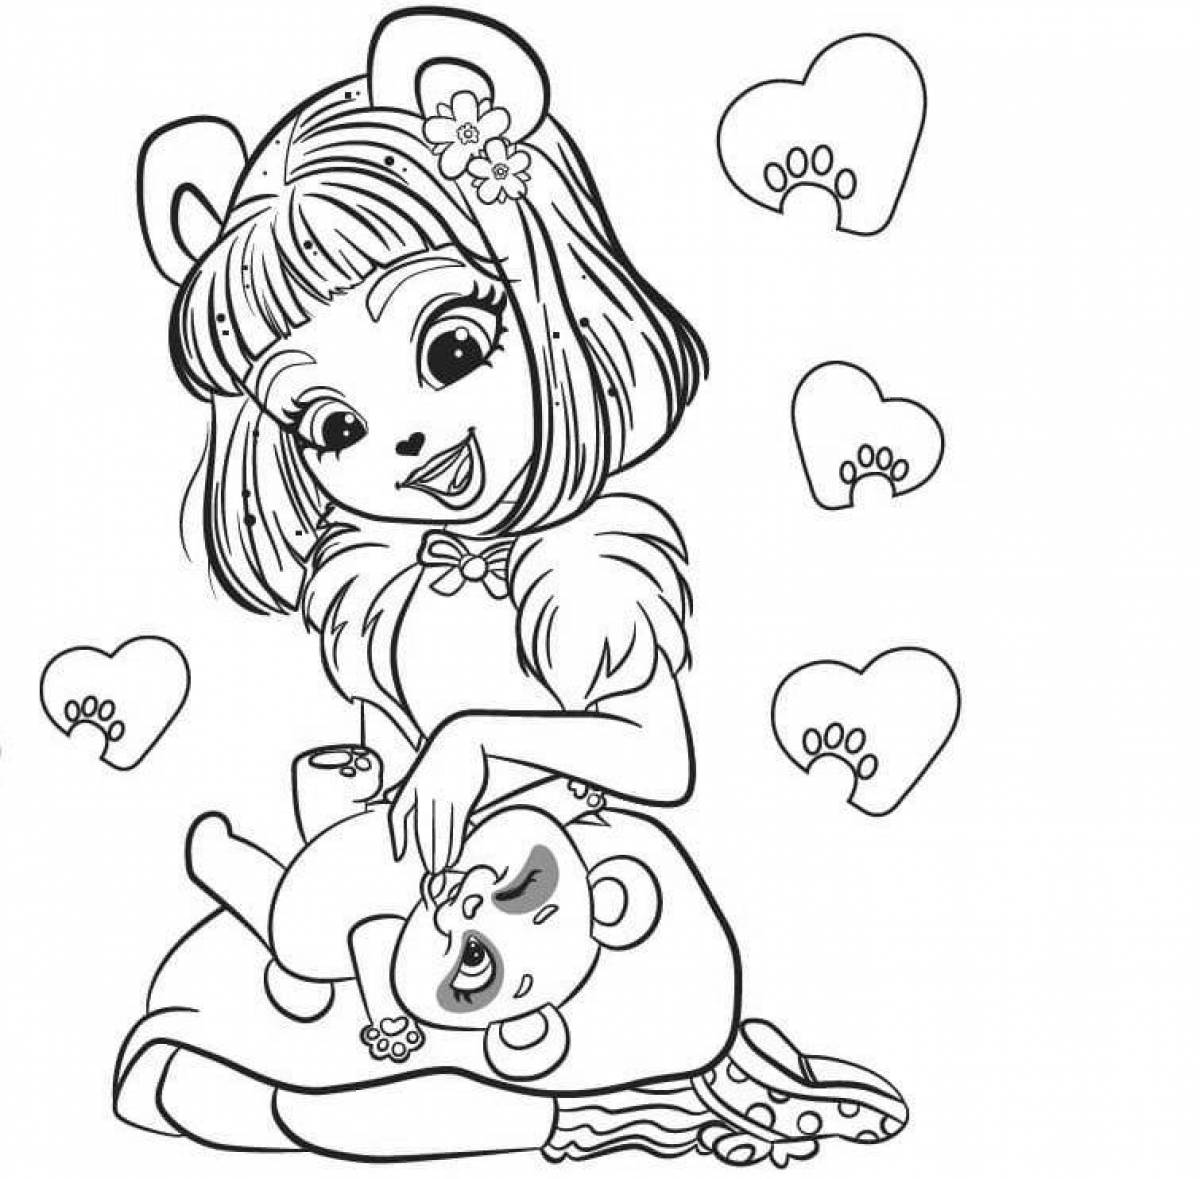 Awesome inchanchymus coloring page